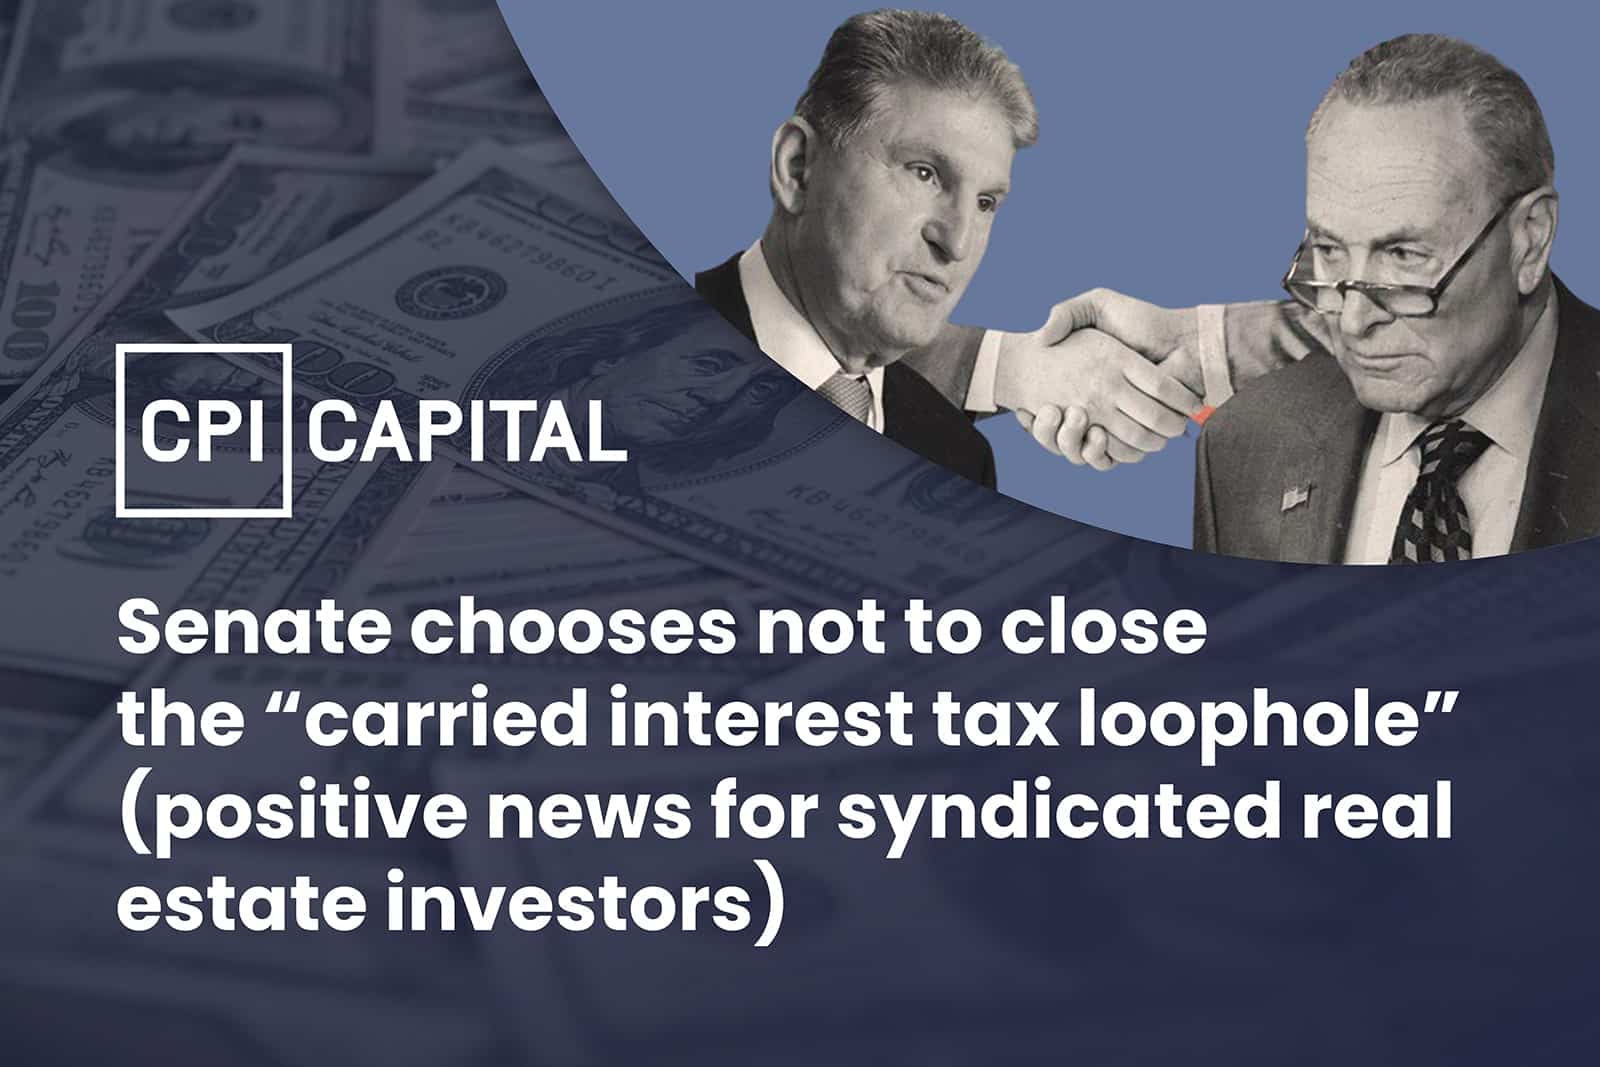 Senate chooses not to close the carried interest tax loophole positive news for syndicated real estate investors